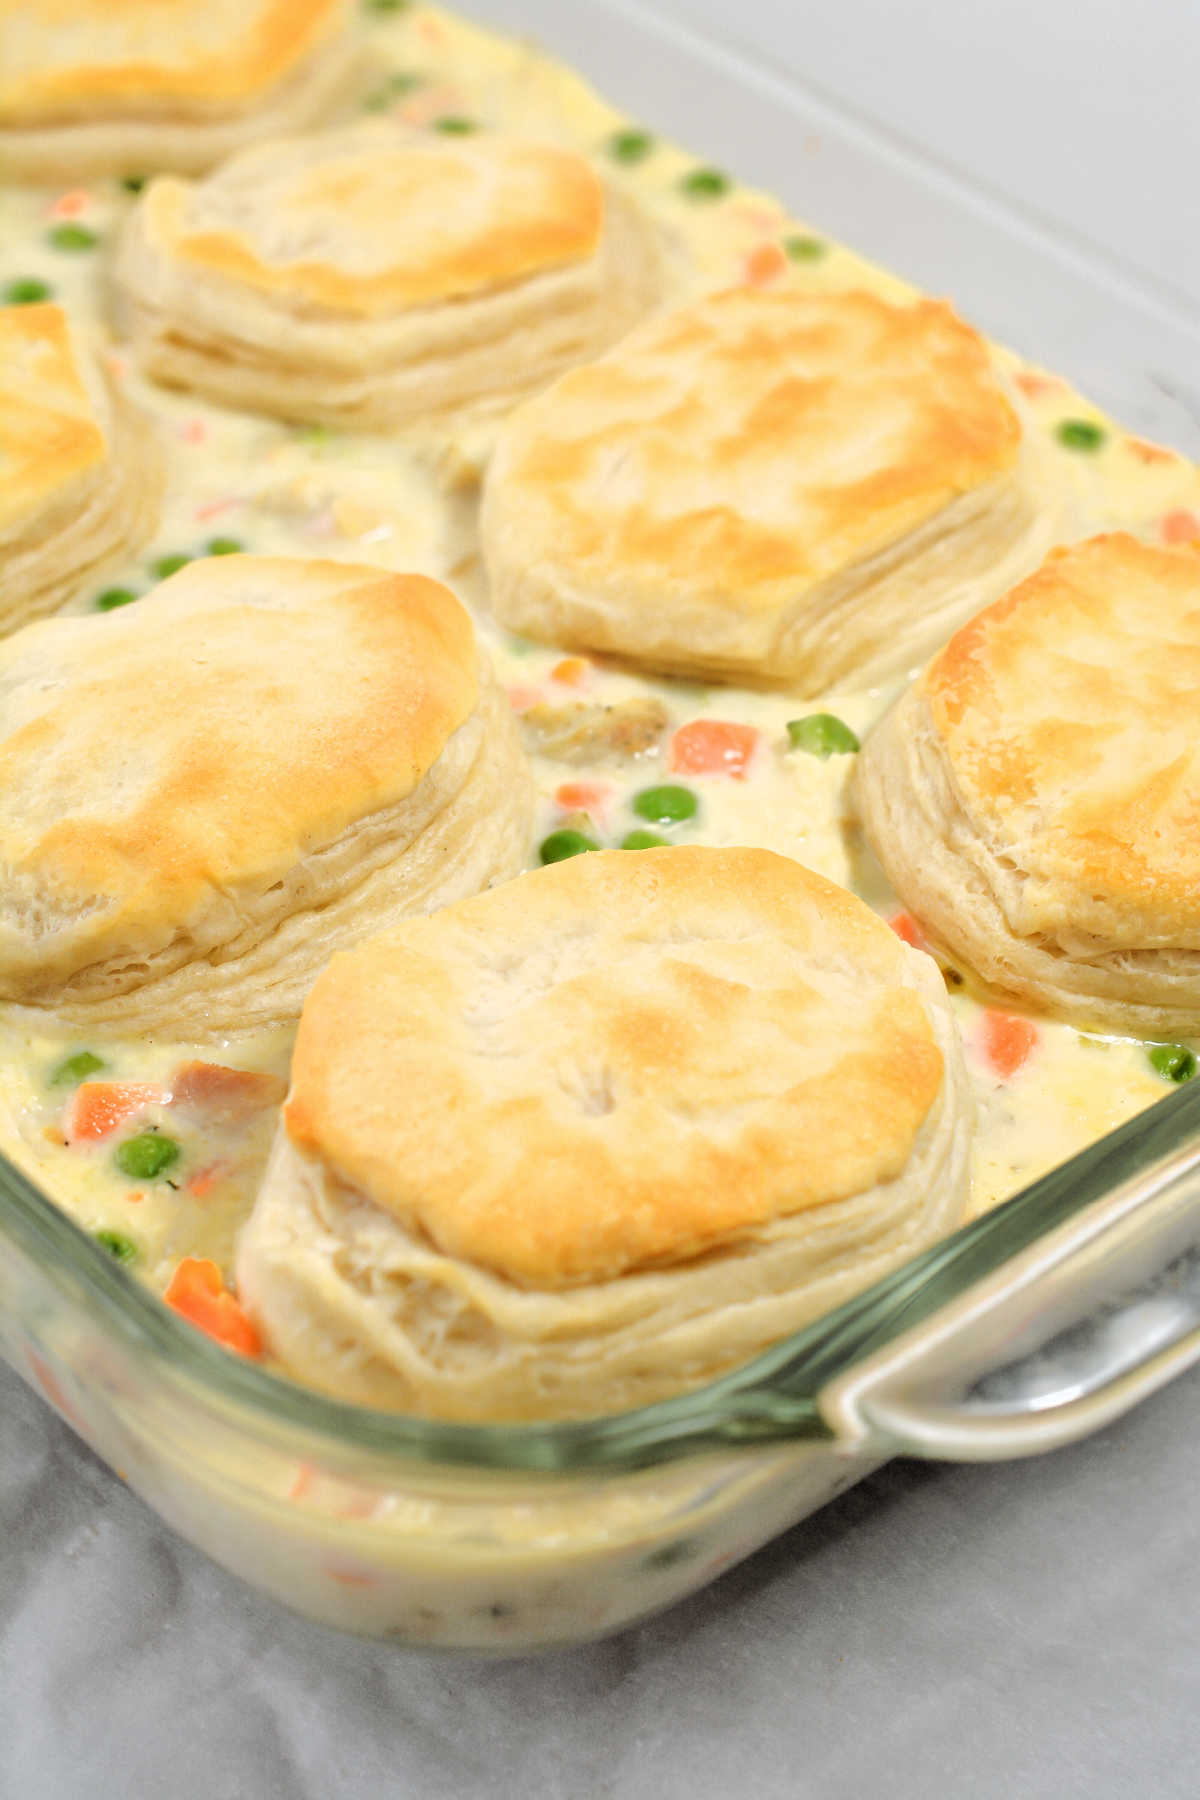 Side view of casserole dish filled with creamy chicken and vegetable mixture topped with flaky biscuits.